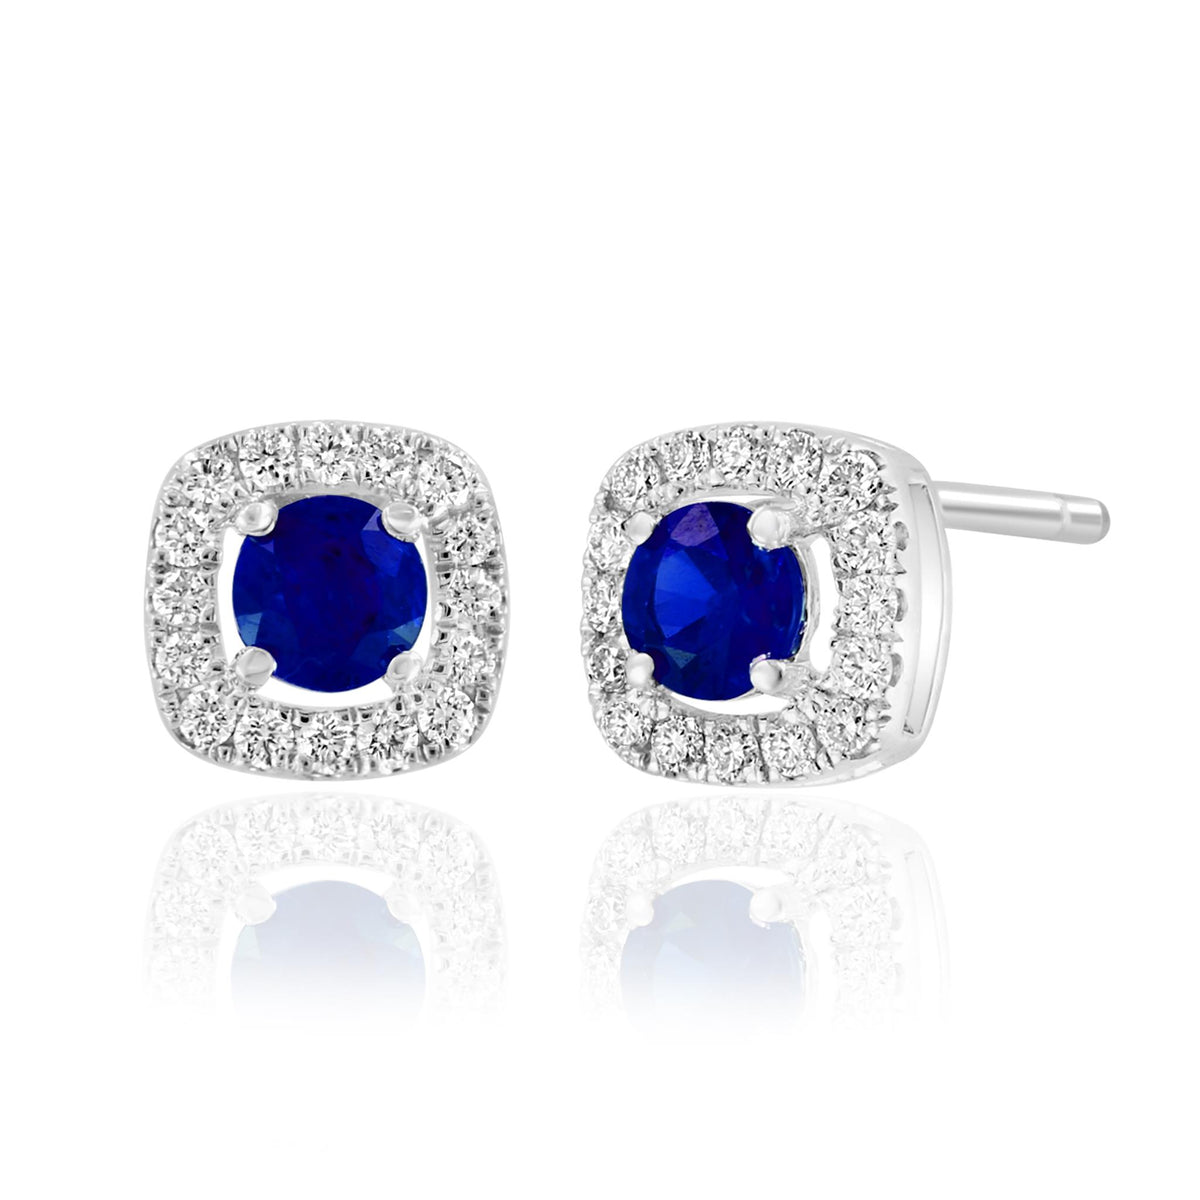 14Kt White Gold Halo Earrings Gemstone Earrings With 0.56ct Sapphires